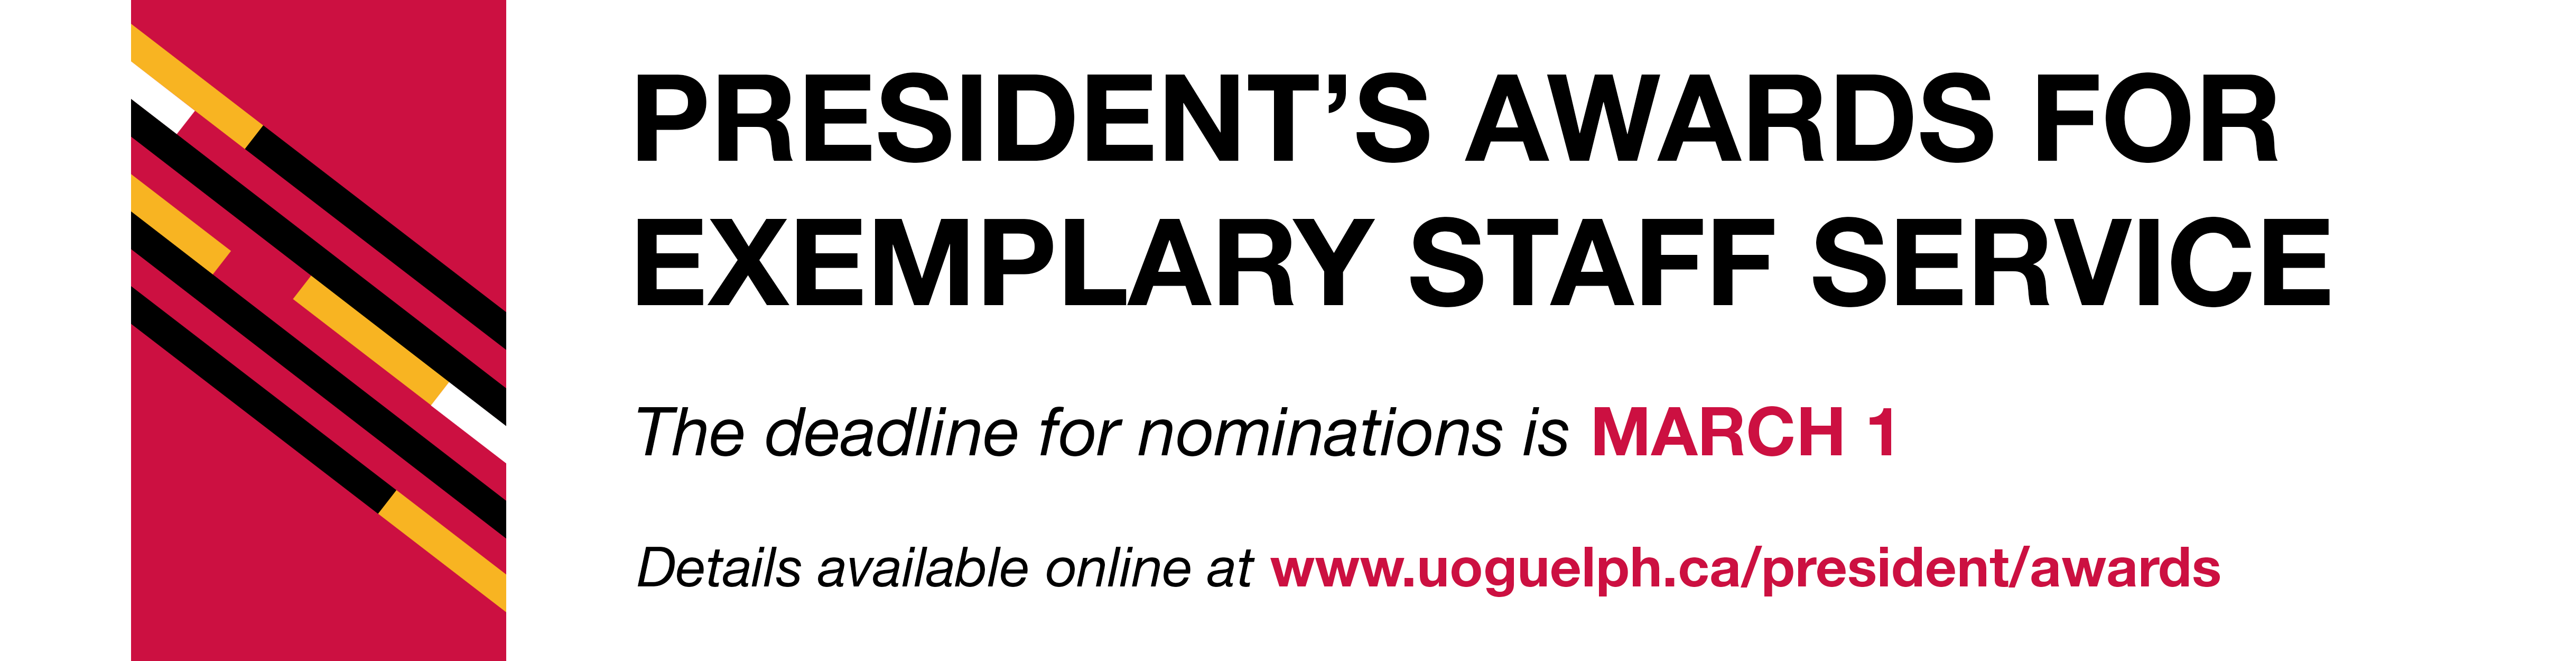 Request for nominations for exemplary staff awards showing deadline of March 1